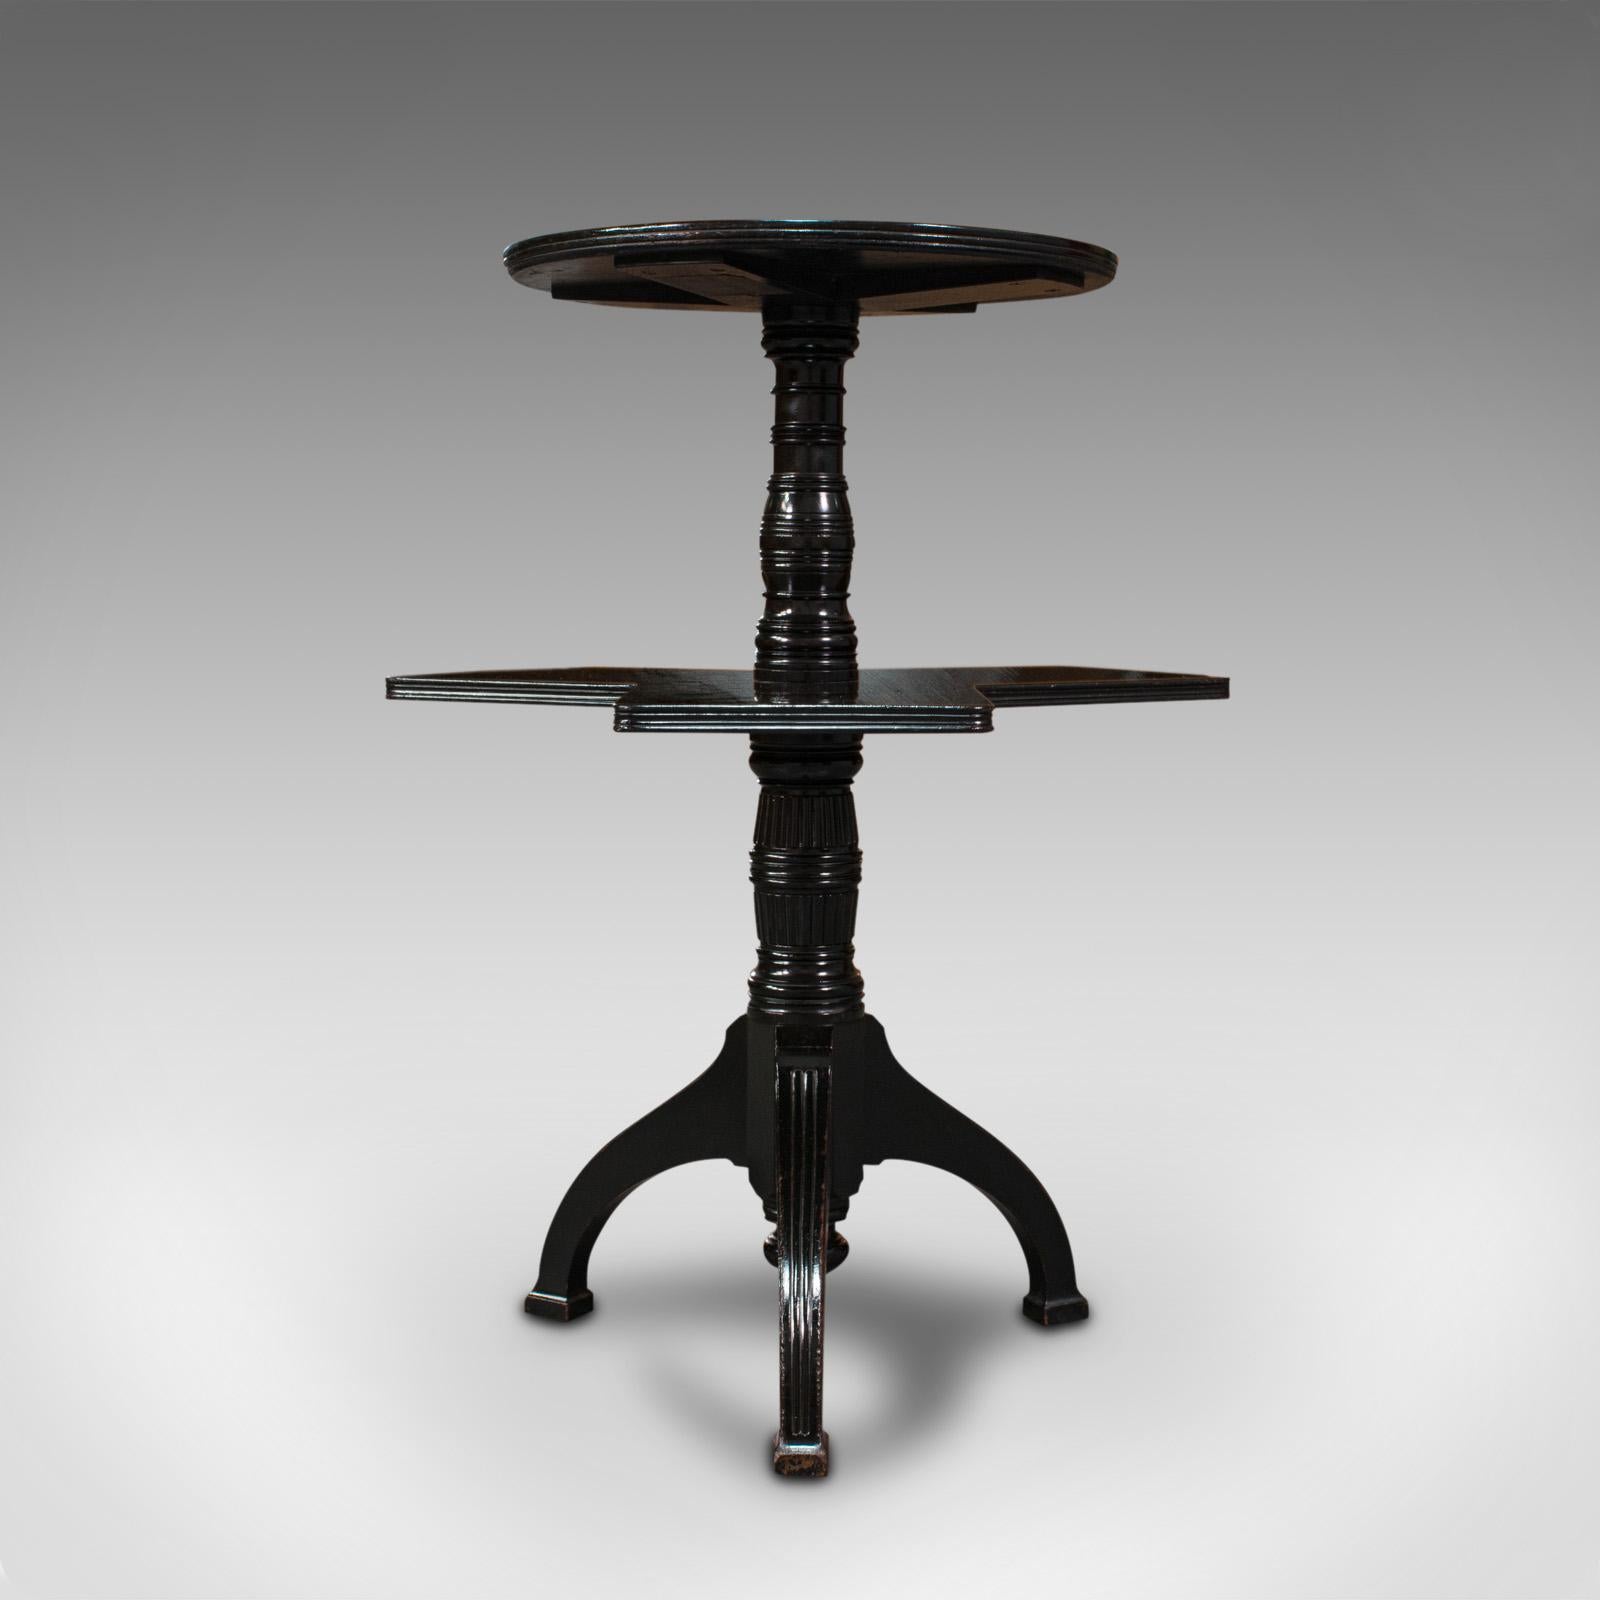 19th Century Antique Afternoon Tea Table, English, Cake Stand, Occasional, Aesthetic Period